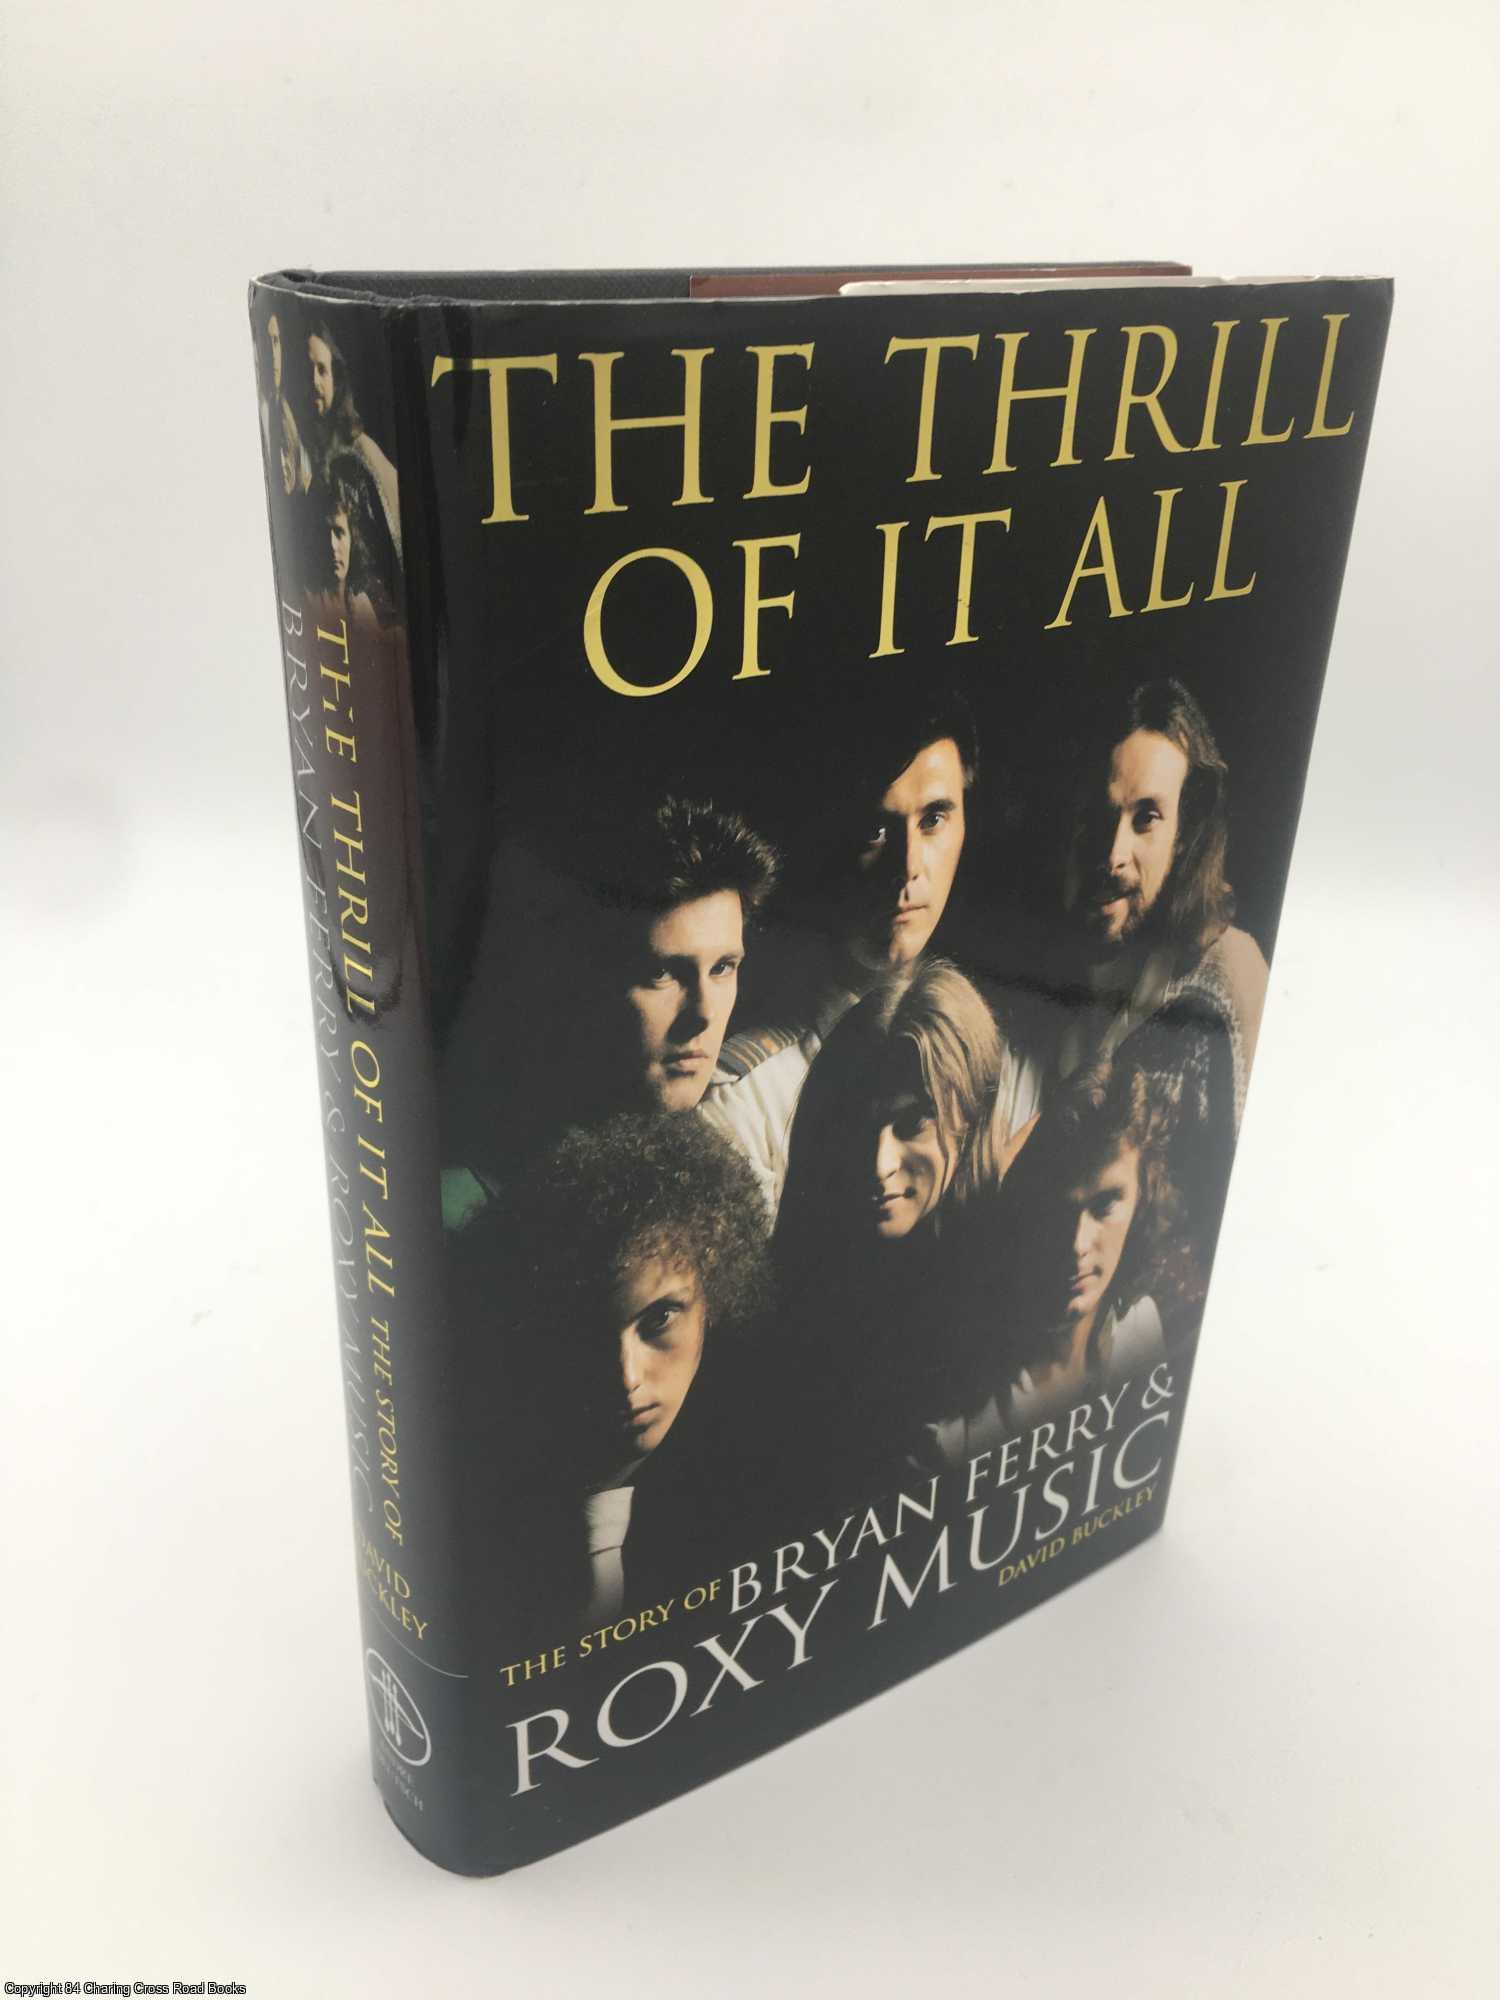 Buckley, David - The Thrill of it All: The Story of Bryan Ferry and Roxy Music